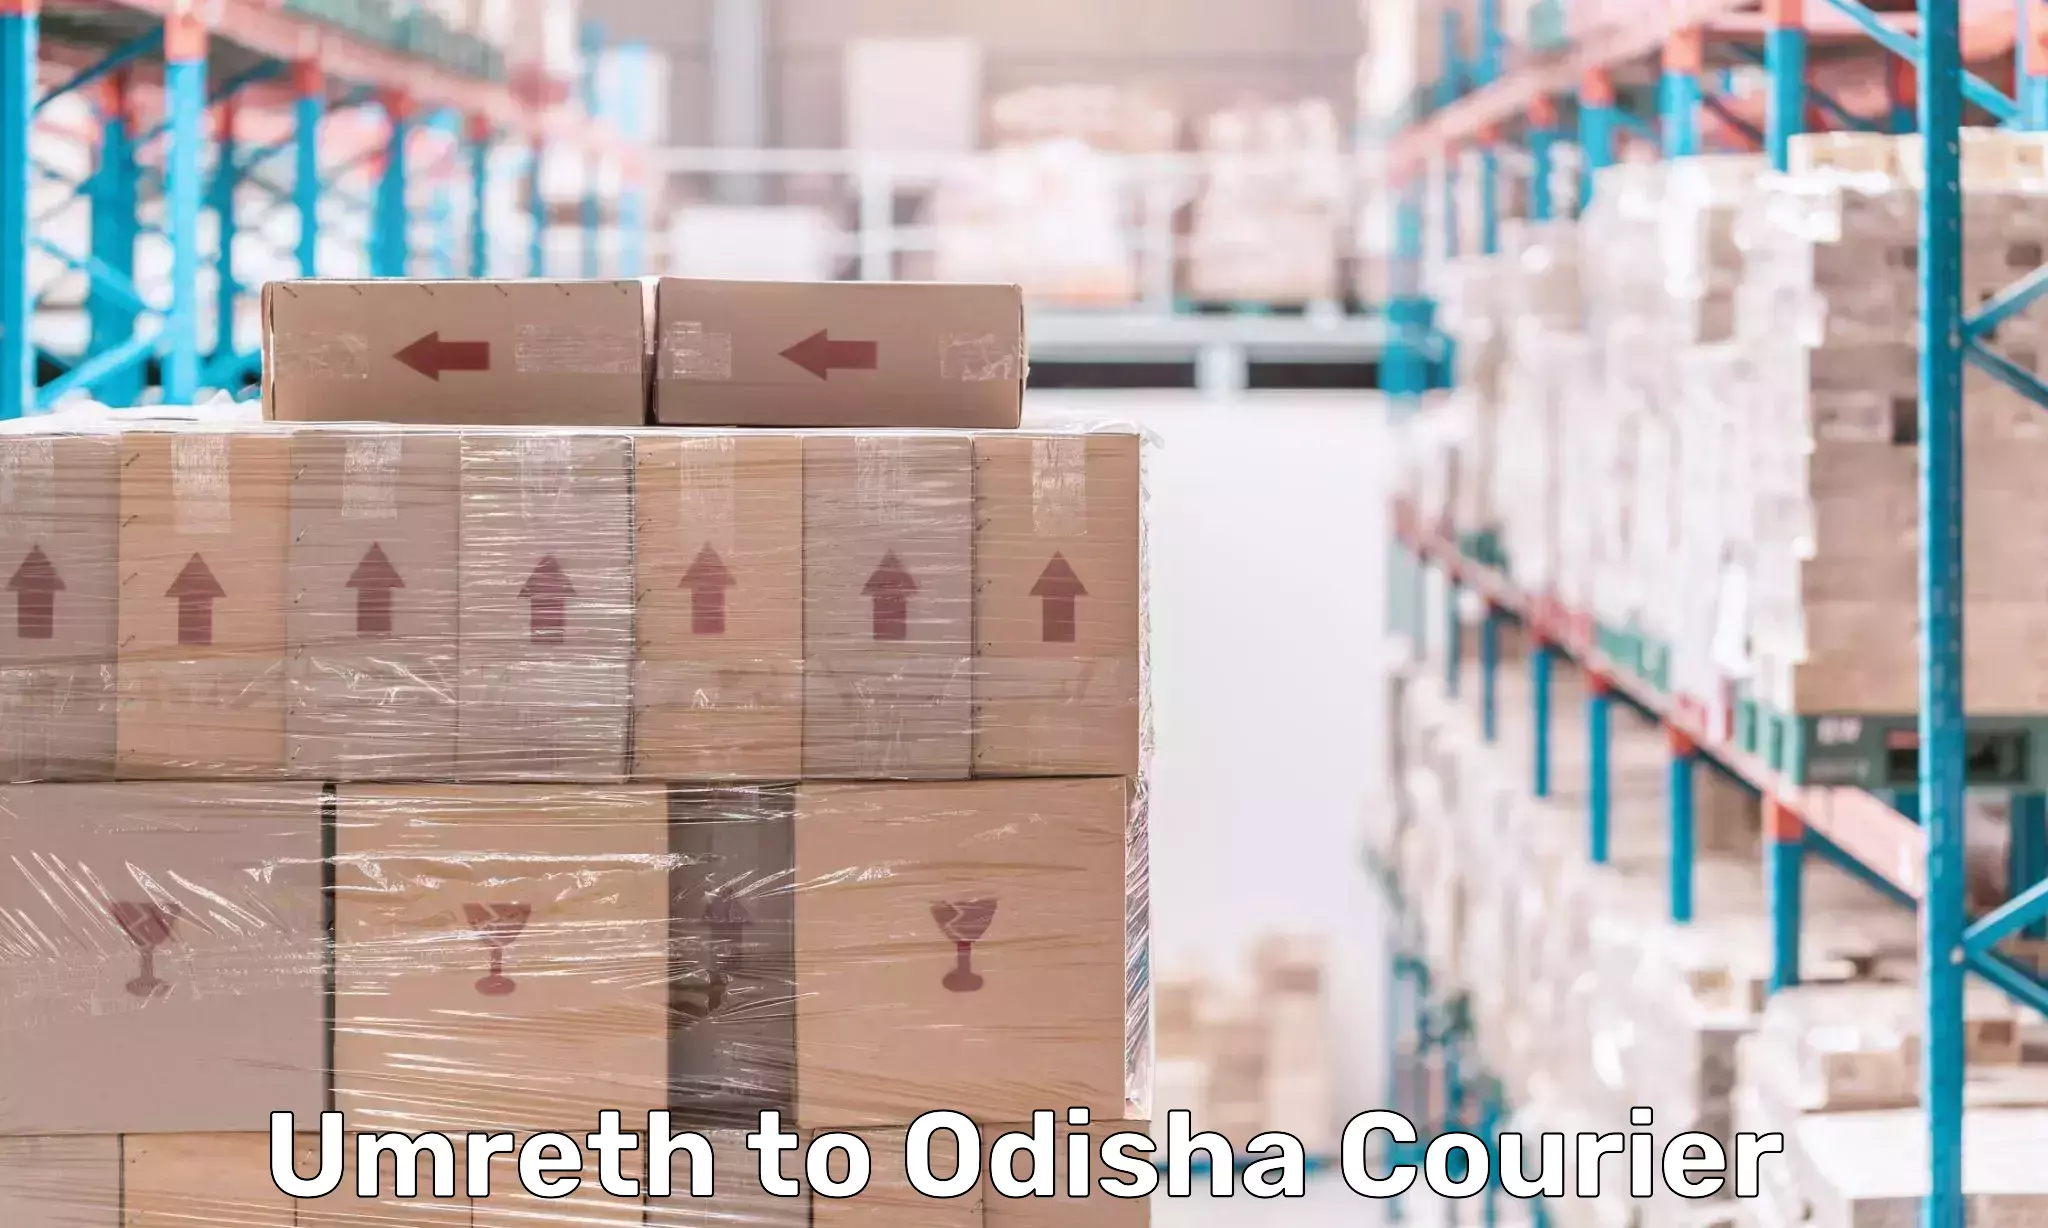 Courier service comparison Umreth to Dhenkanal